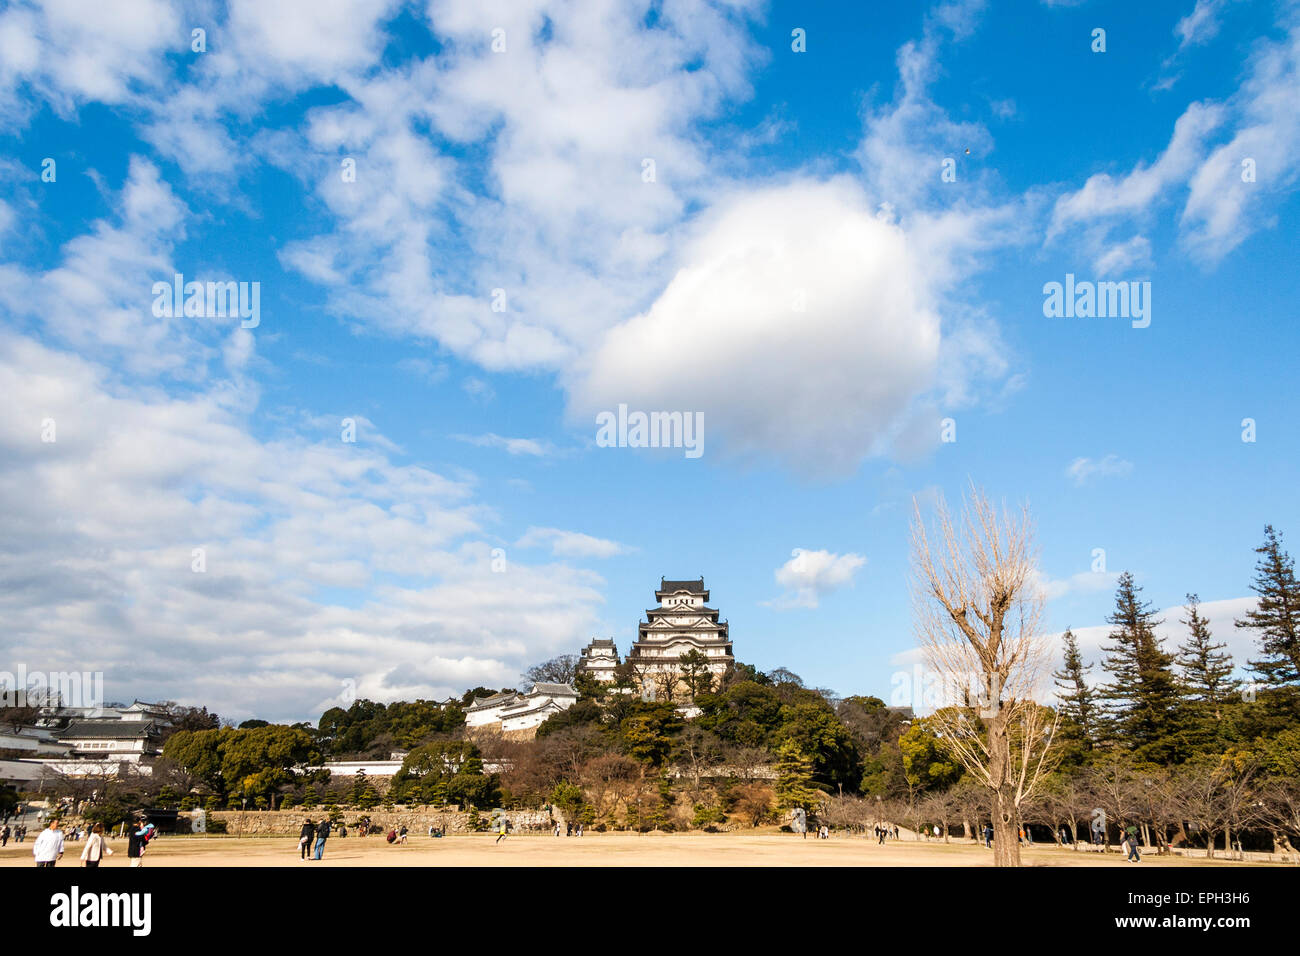 Wide angle iconic view across park of the castle at Himeji with it's keep towering above all, and large expense of blue sky with white clouds above. Stock Photo